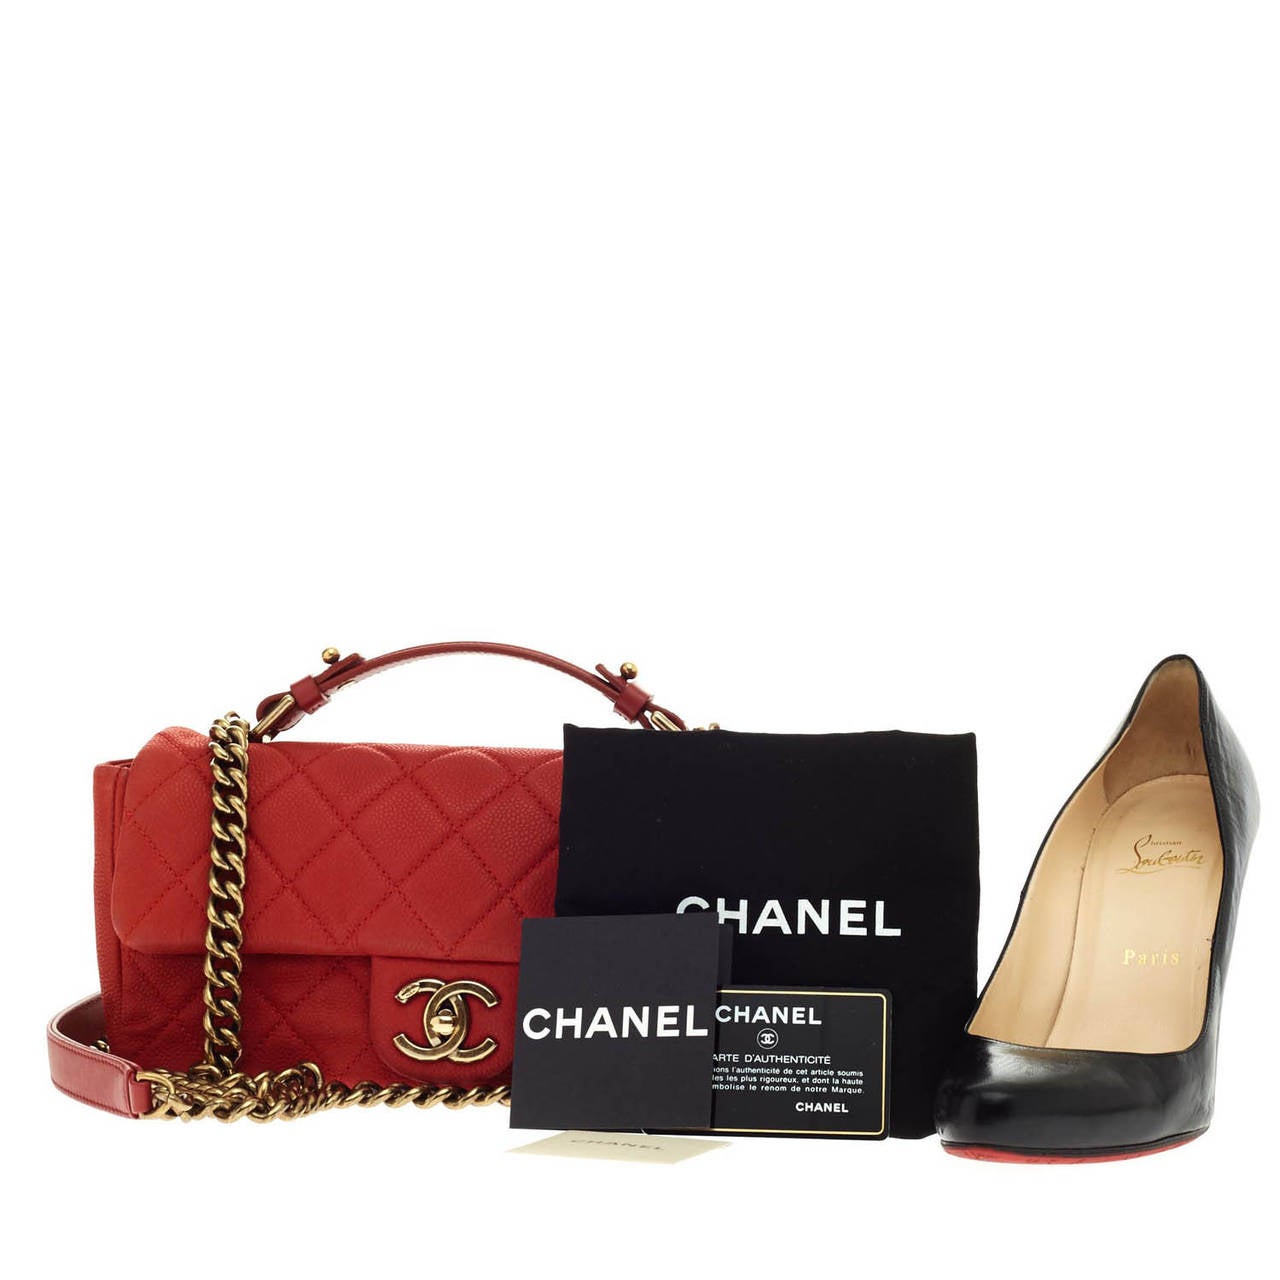 Debuting at Chanel's Pre-Spring 2013 Collection, this authentic Chanel Chic Quilt Flap in size Small in stunning muted red caviar is a modern twist to the classic Chanel design. Designed with a top handle and aged brass leather chain straps, this